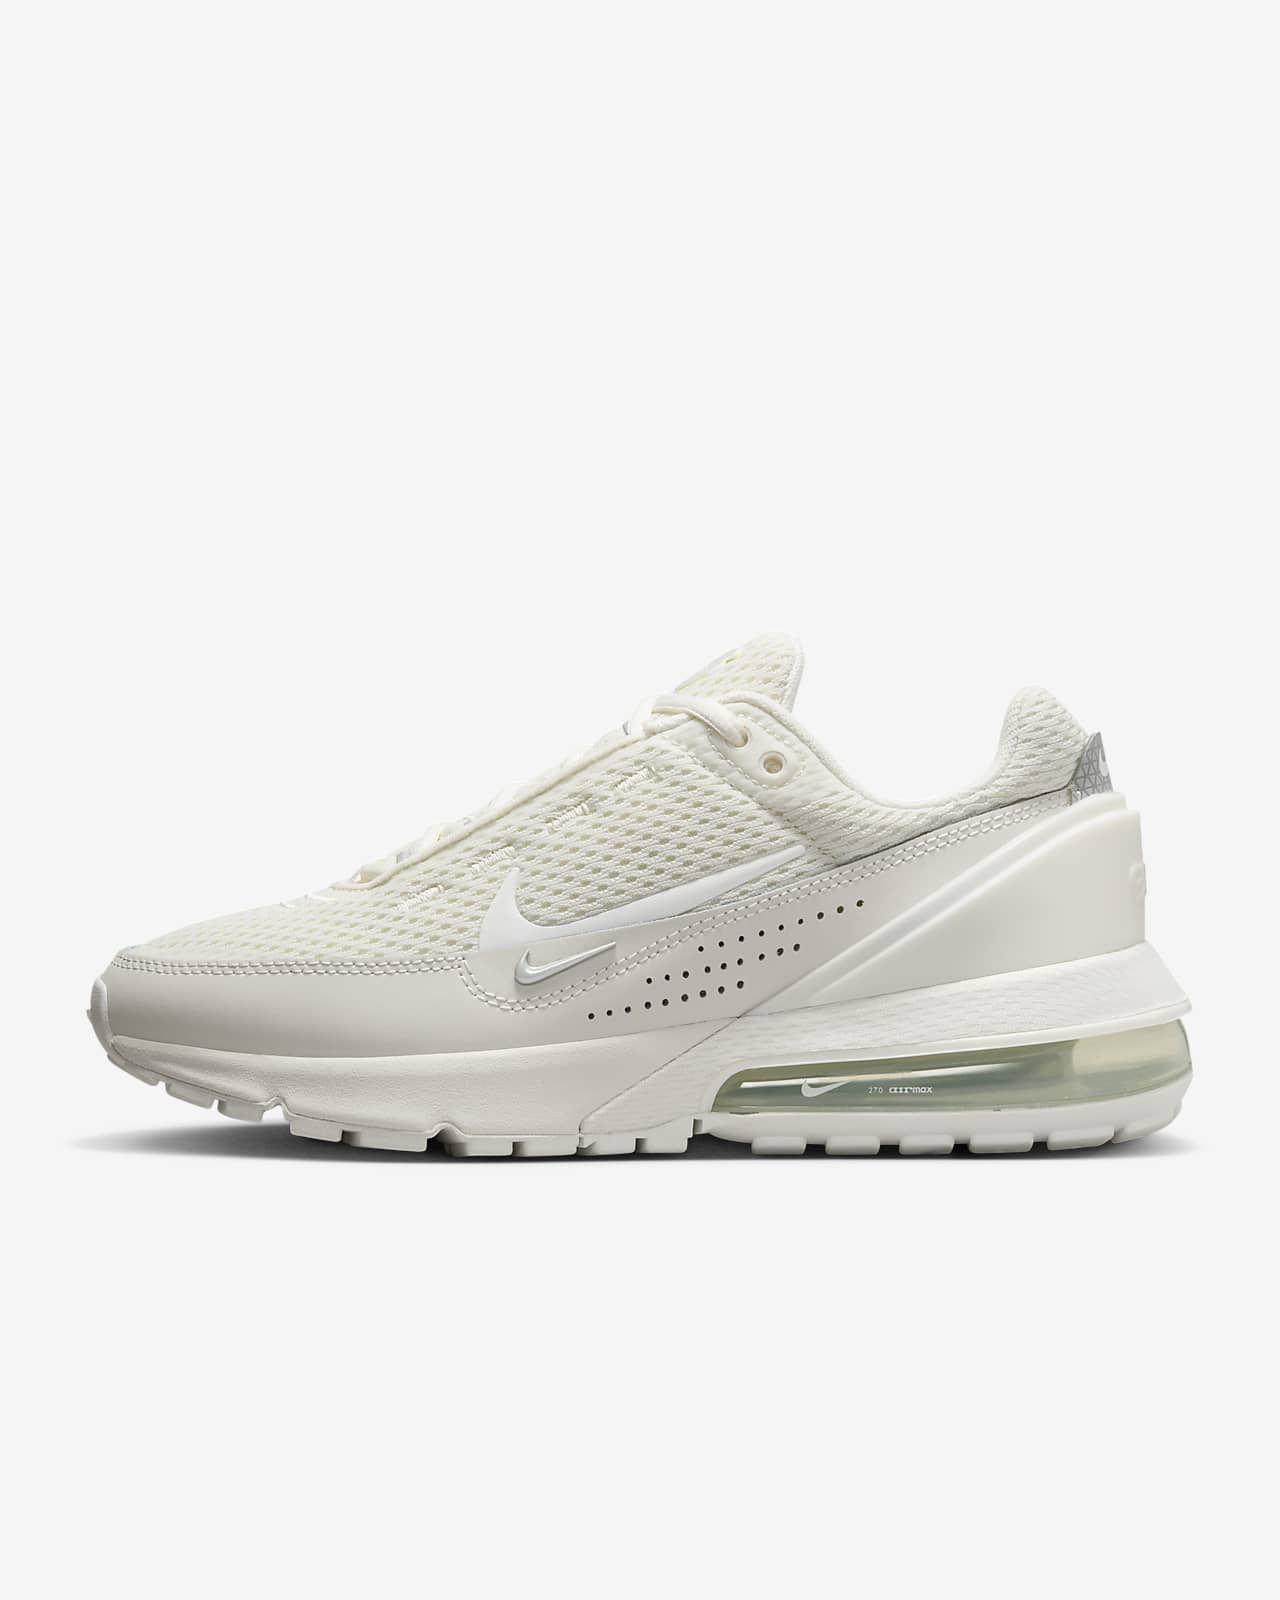 Nike Air Pulse Women's Shoes. Nike IL